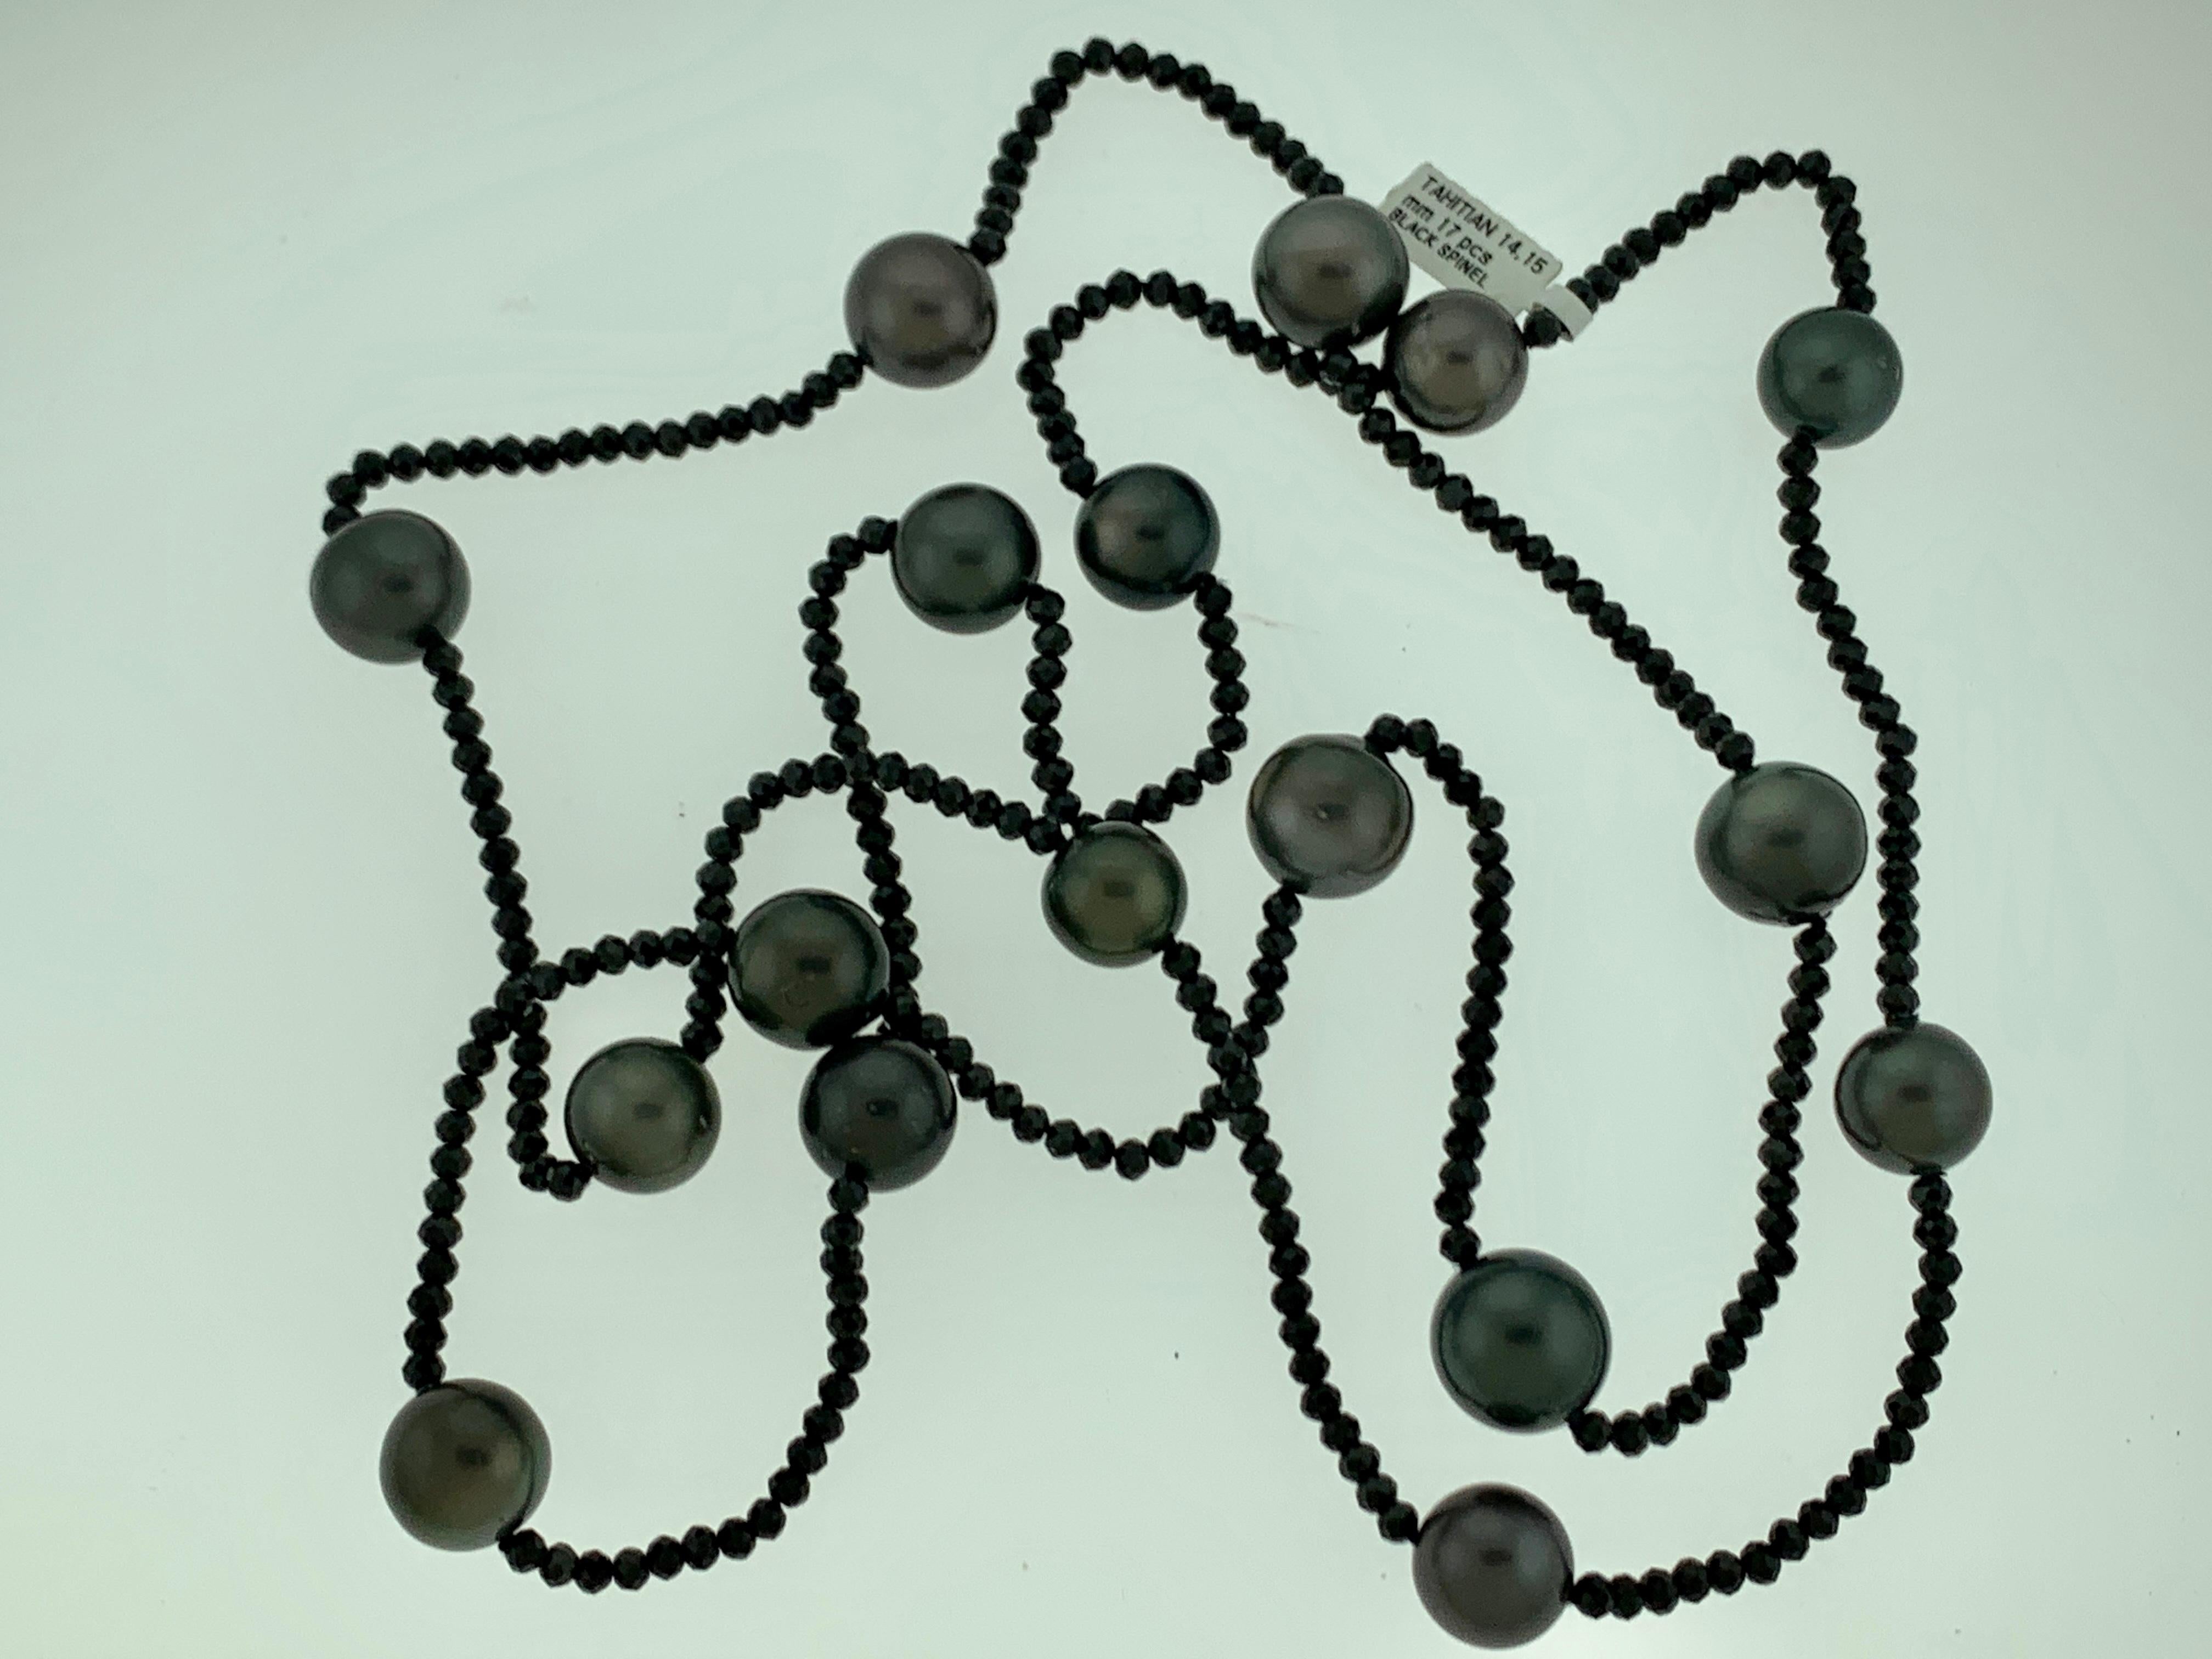 Black Tahitian Pearl Single Strand Necklace with Black Spinel, Opera Length 46